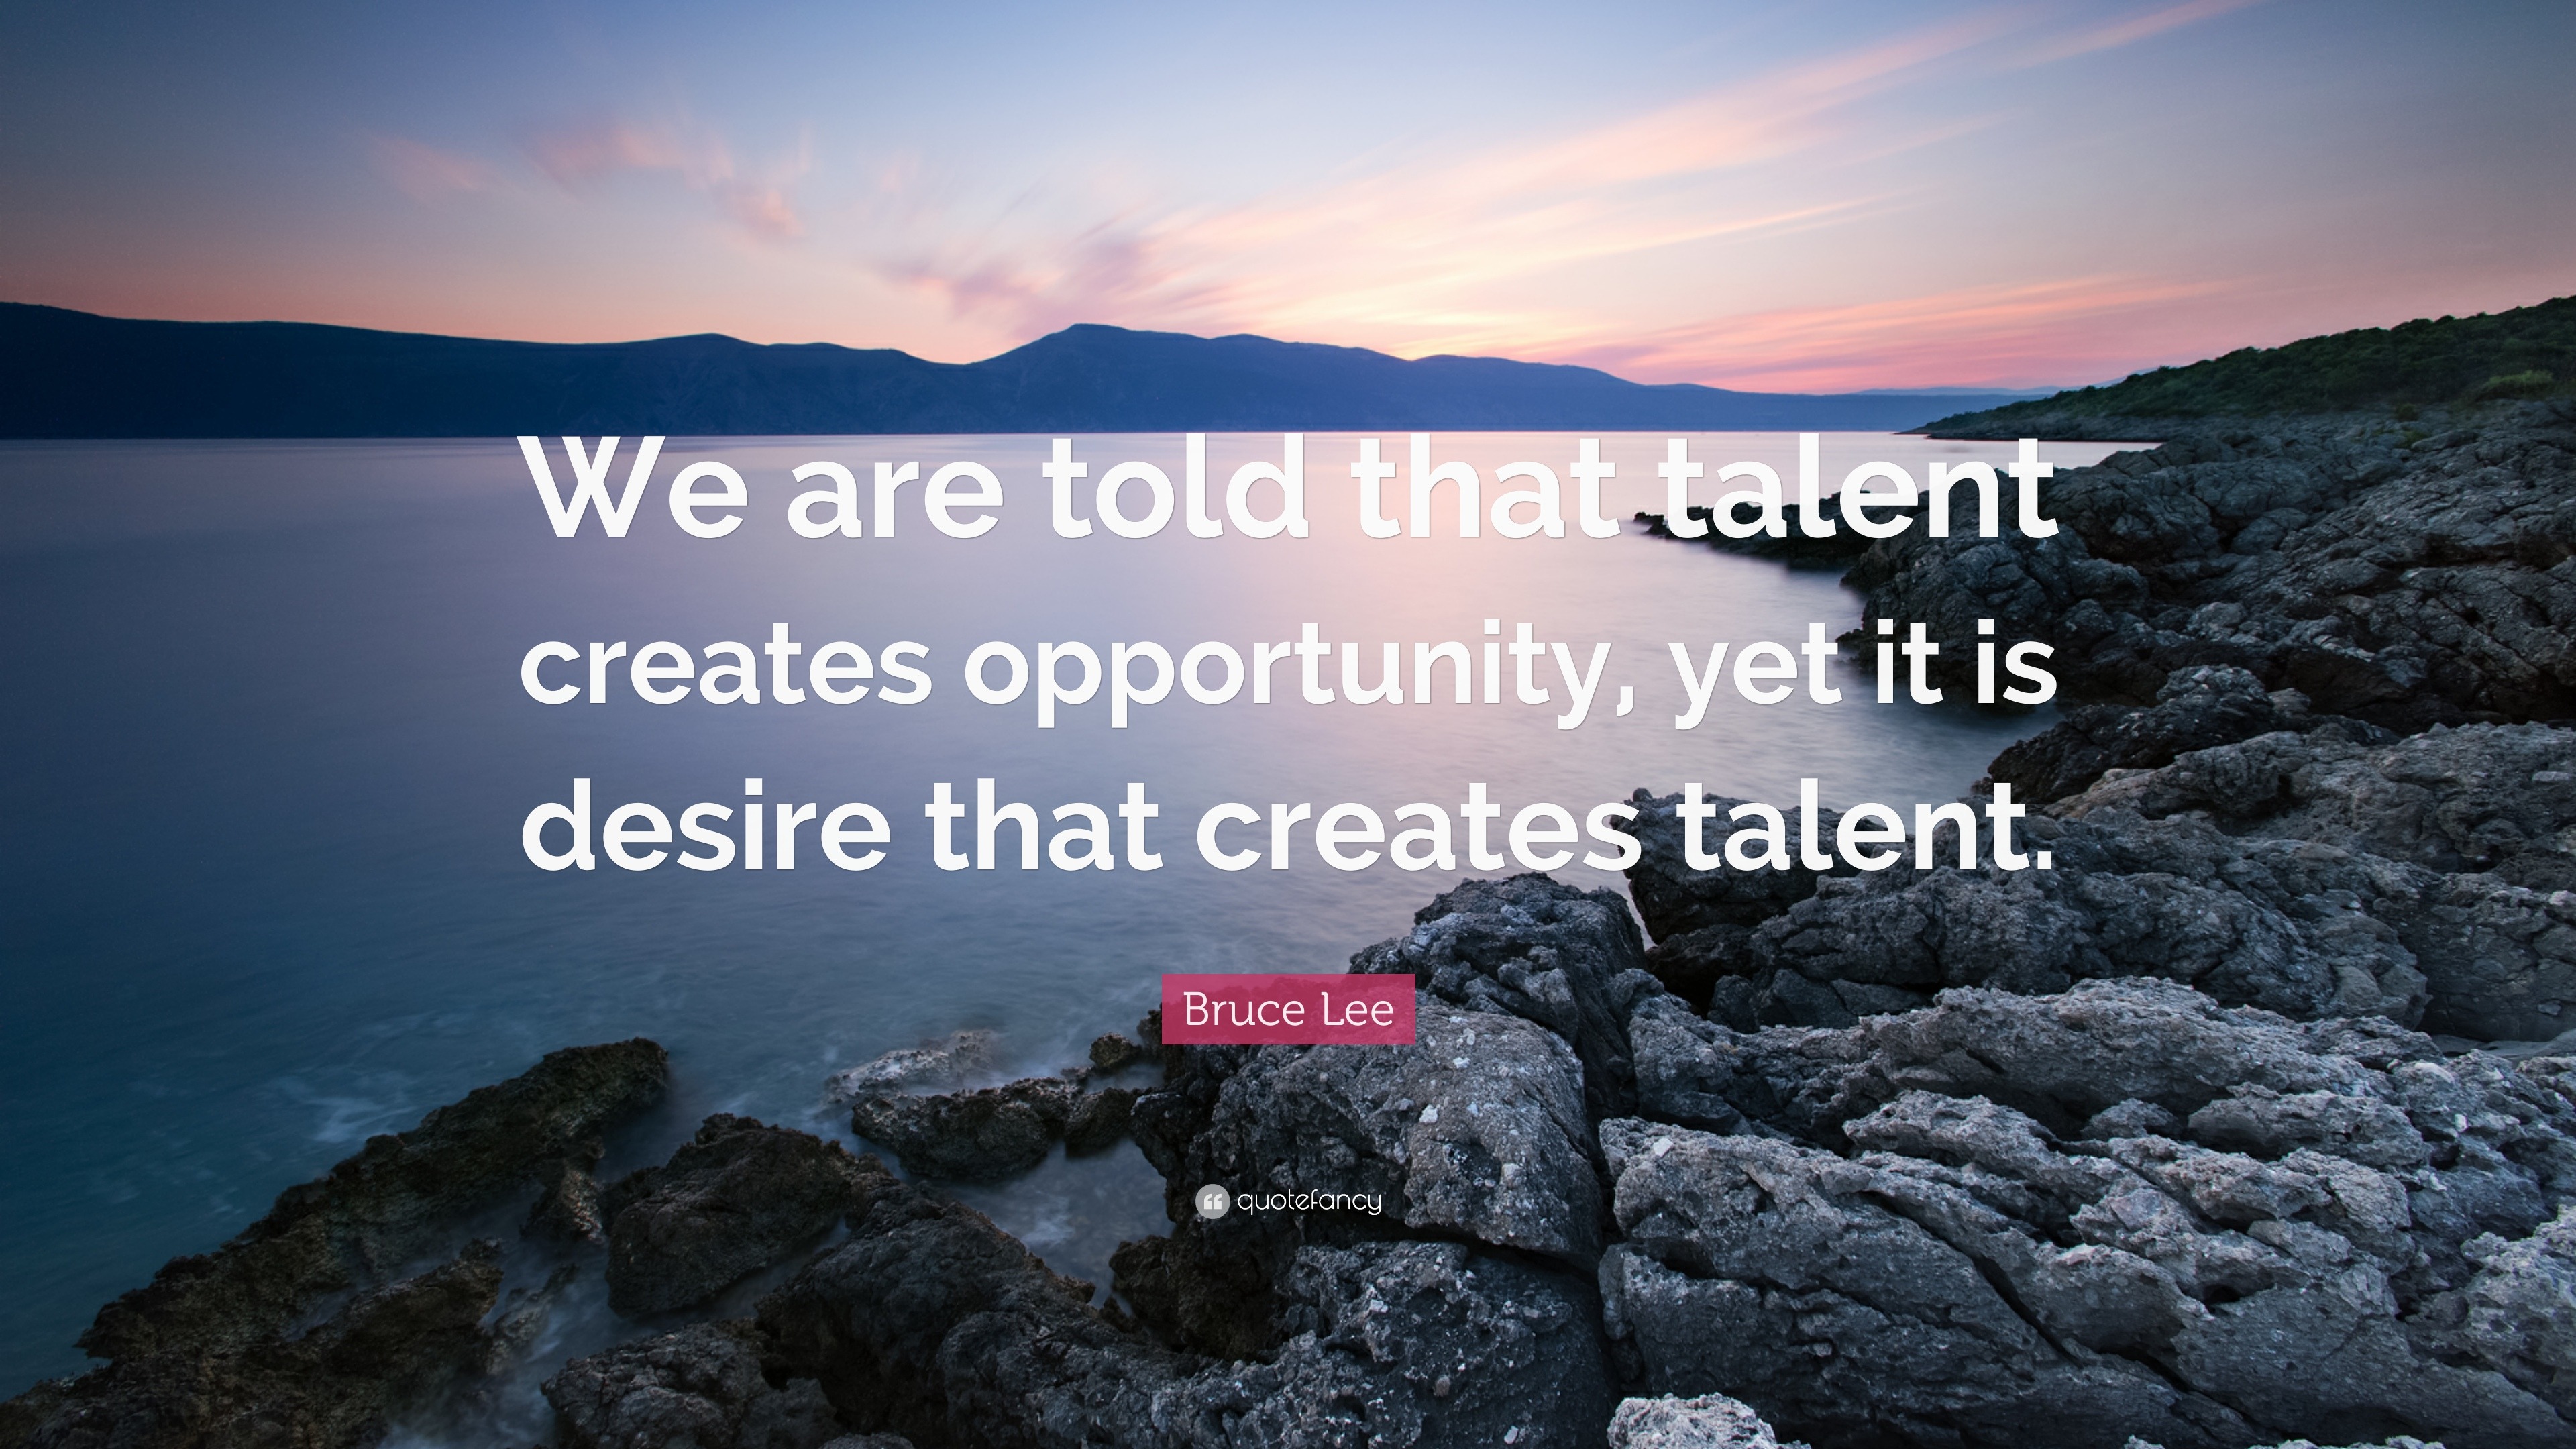 Bruce Lee Quote “We are told that talent creates